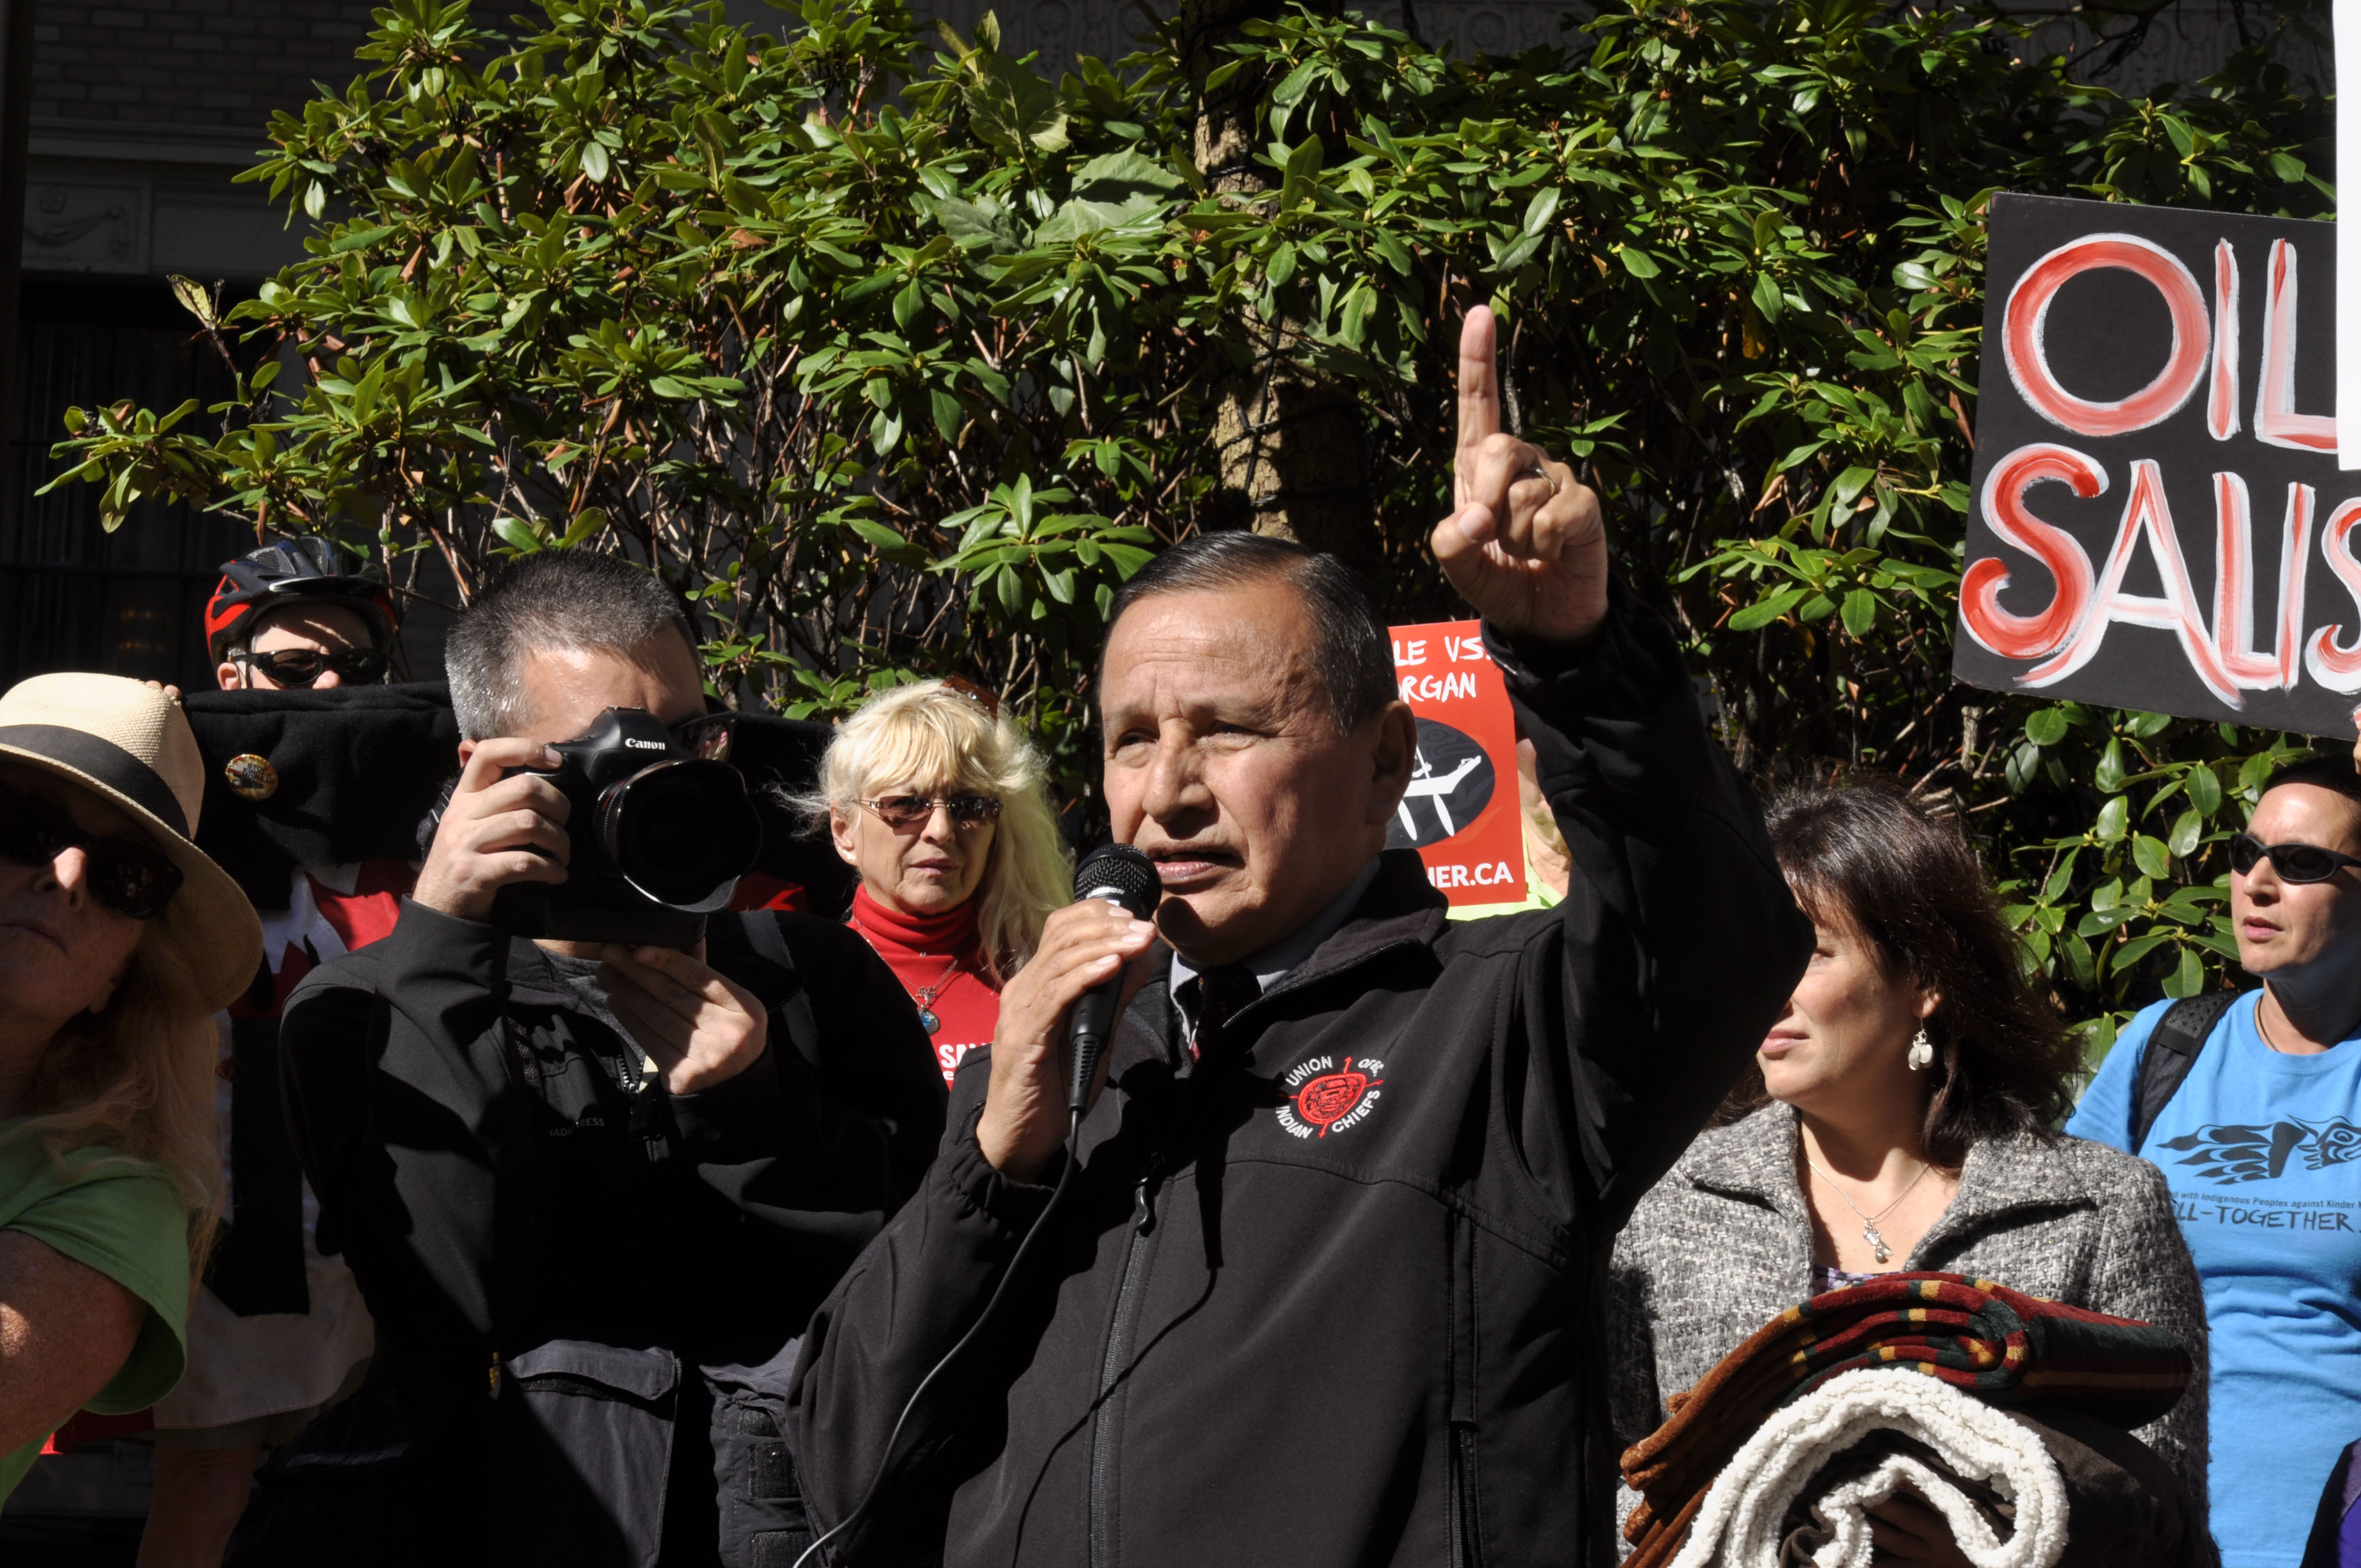 Grand Chief Stewart Phillip speaking against the Kinder Morgan pipeline in an earlier protest